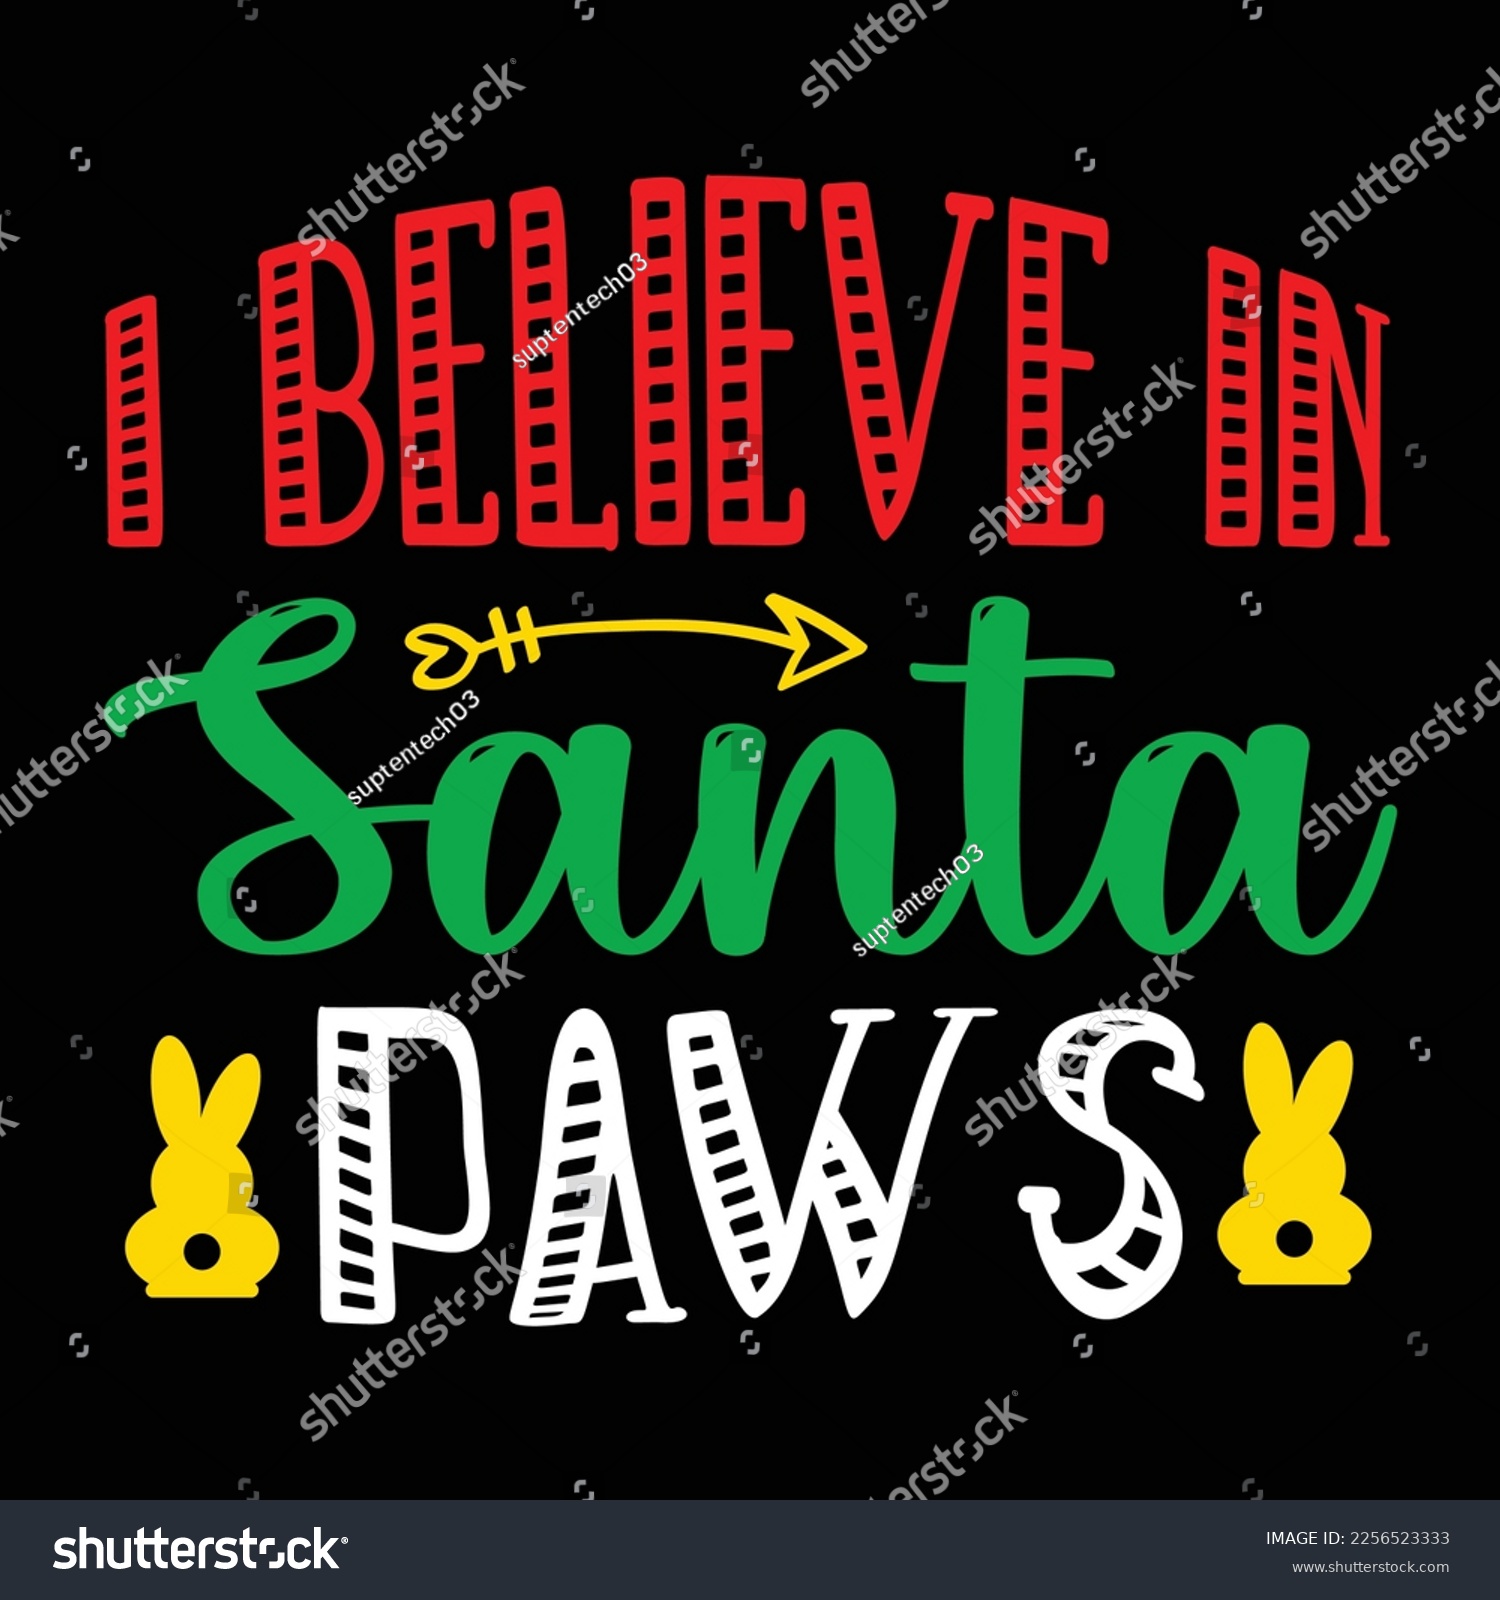 SVG of I Believe In Santa Paws, Merry Christmas shirts Print Template, Xmas Ugly Snow Santa Clouse New Year Holiday Candy Santa Hat vector illustration for Christmas hand lettered svg